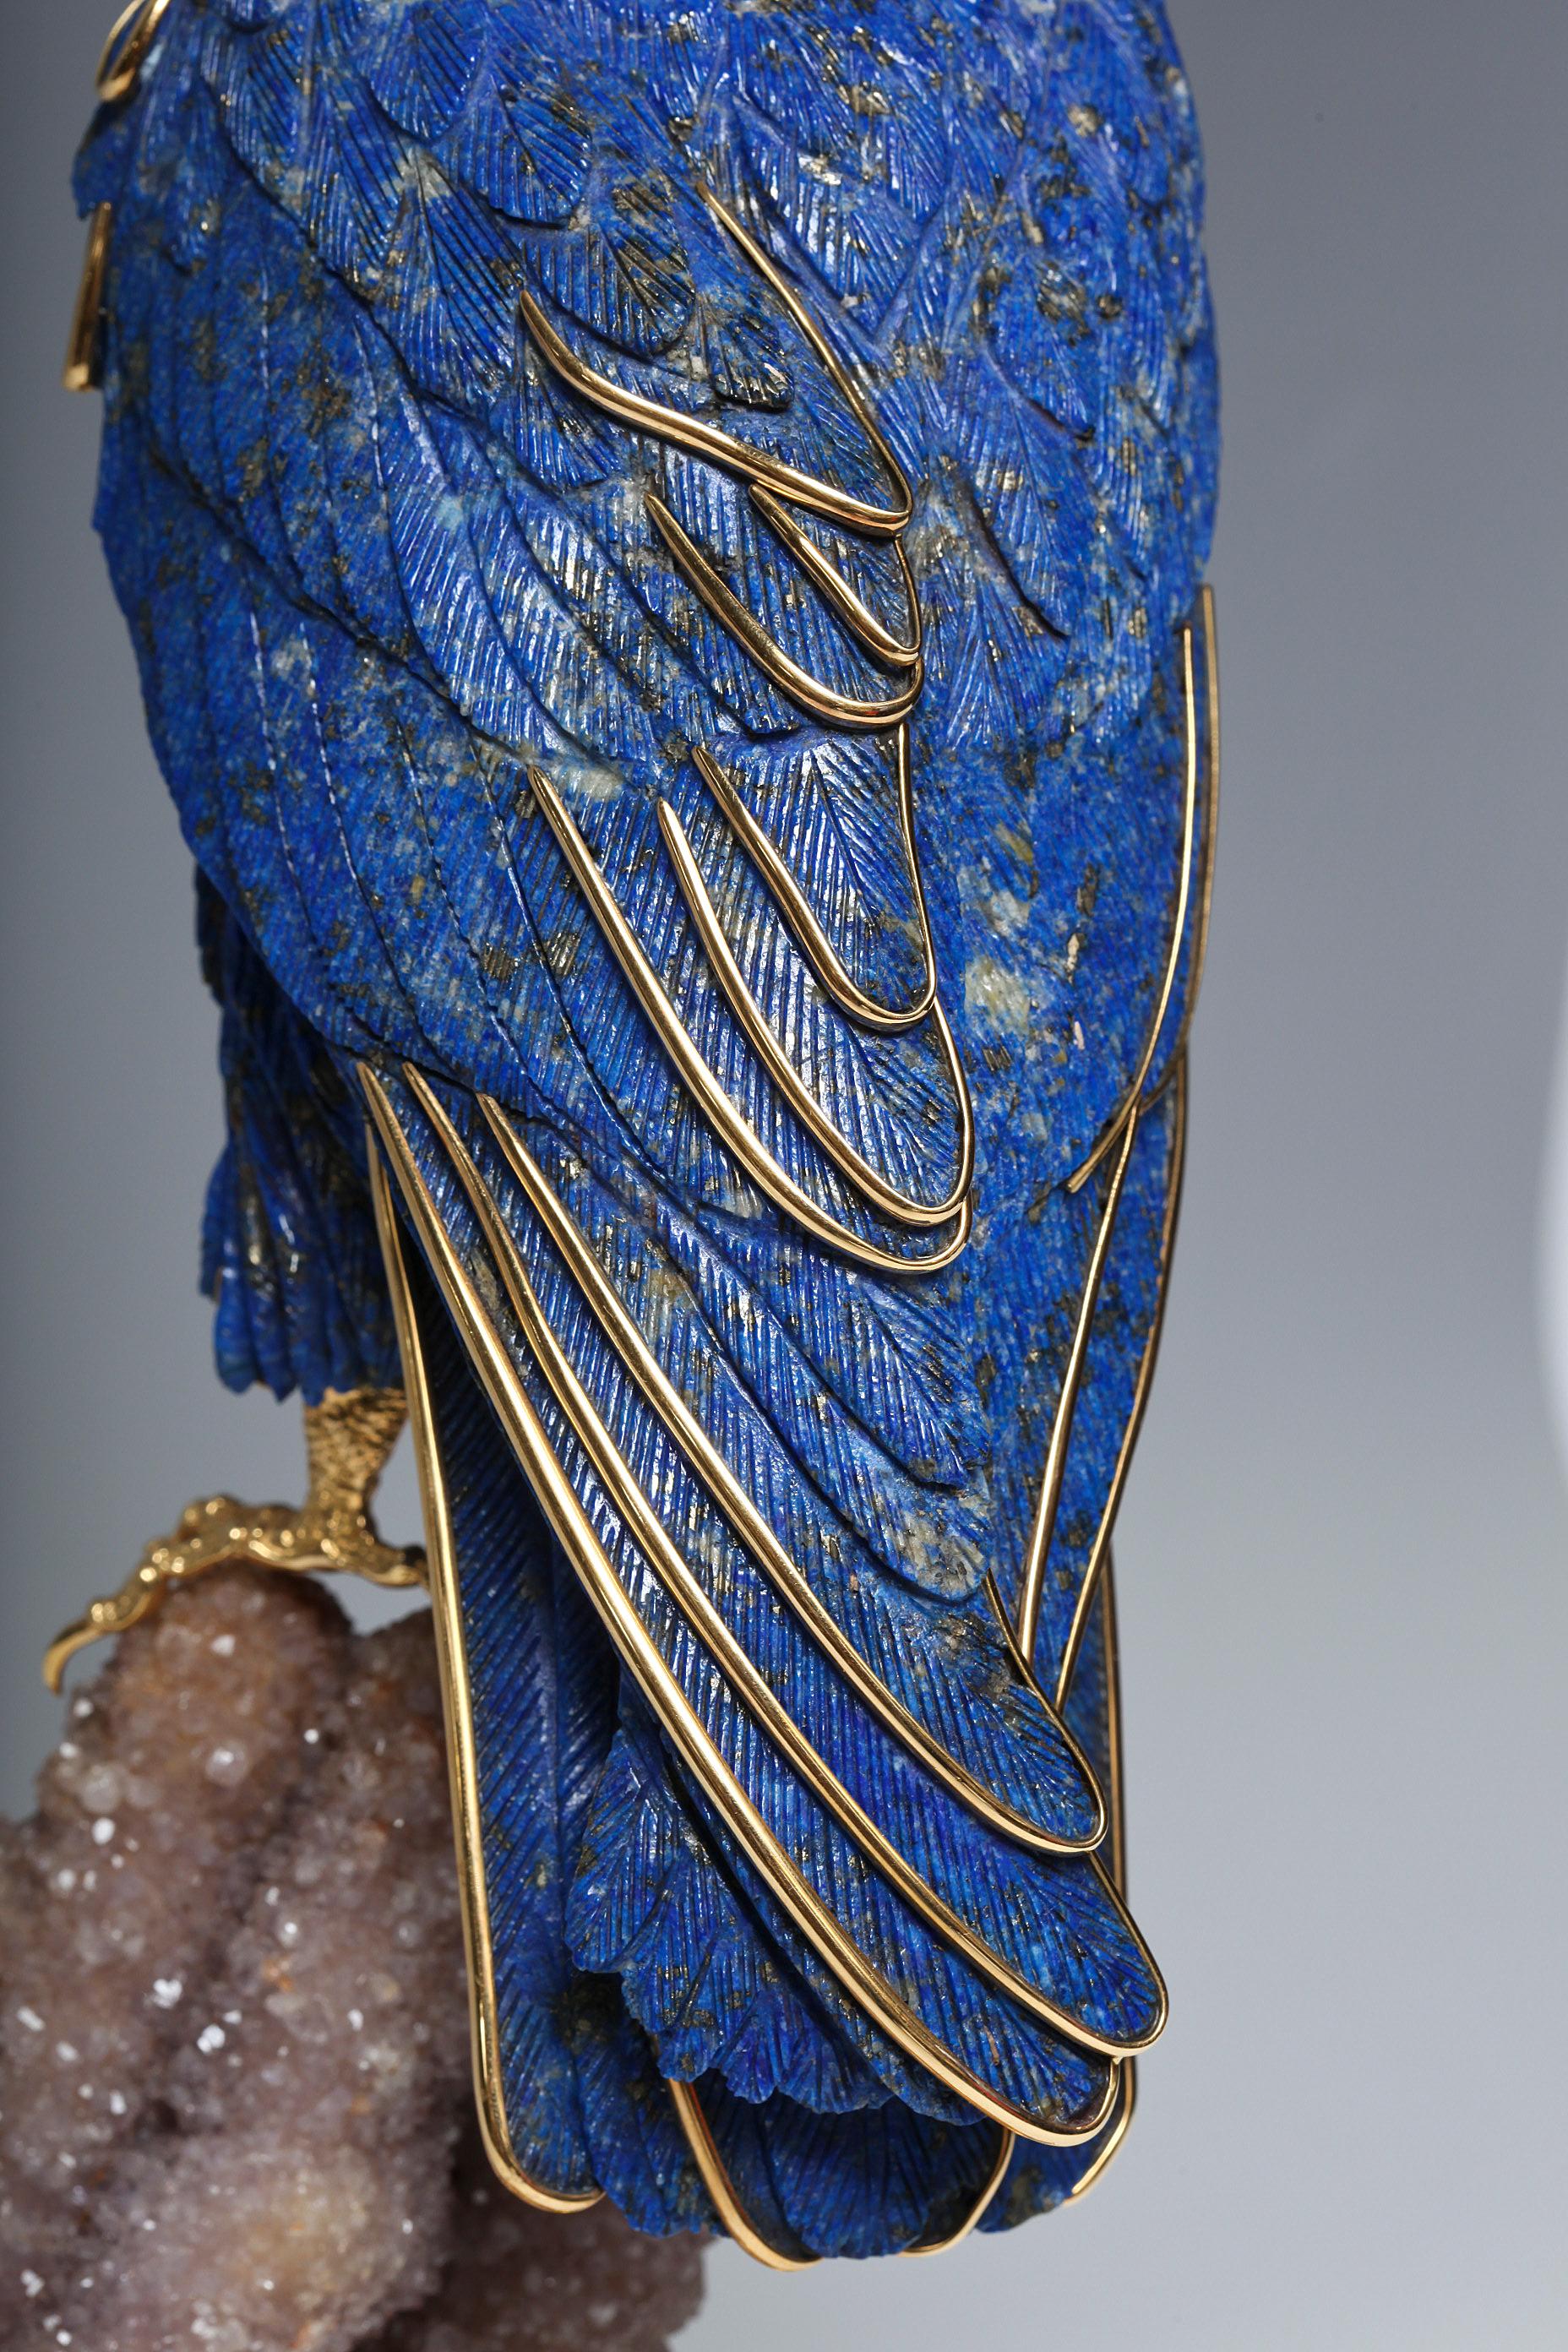 20th Century An Important Jeweled, Gold, Lapis Lazuli Falcon by Asprey & Co. London, Signed